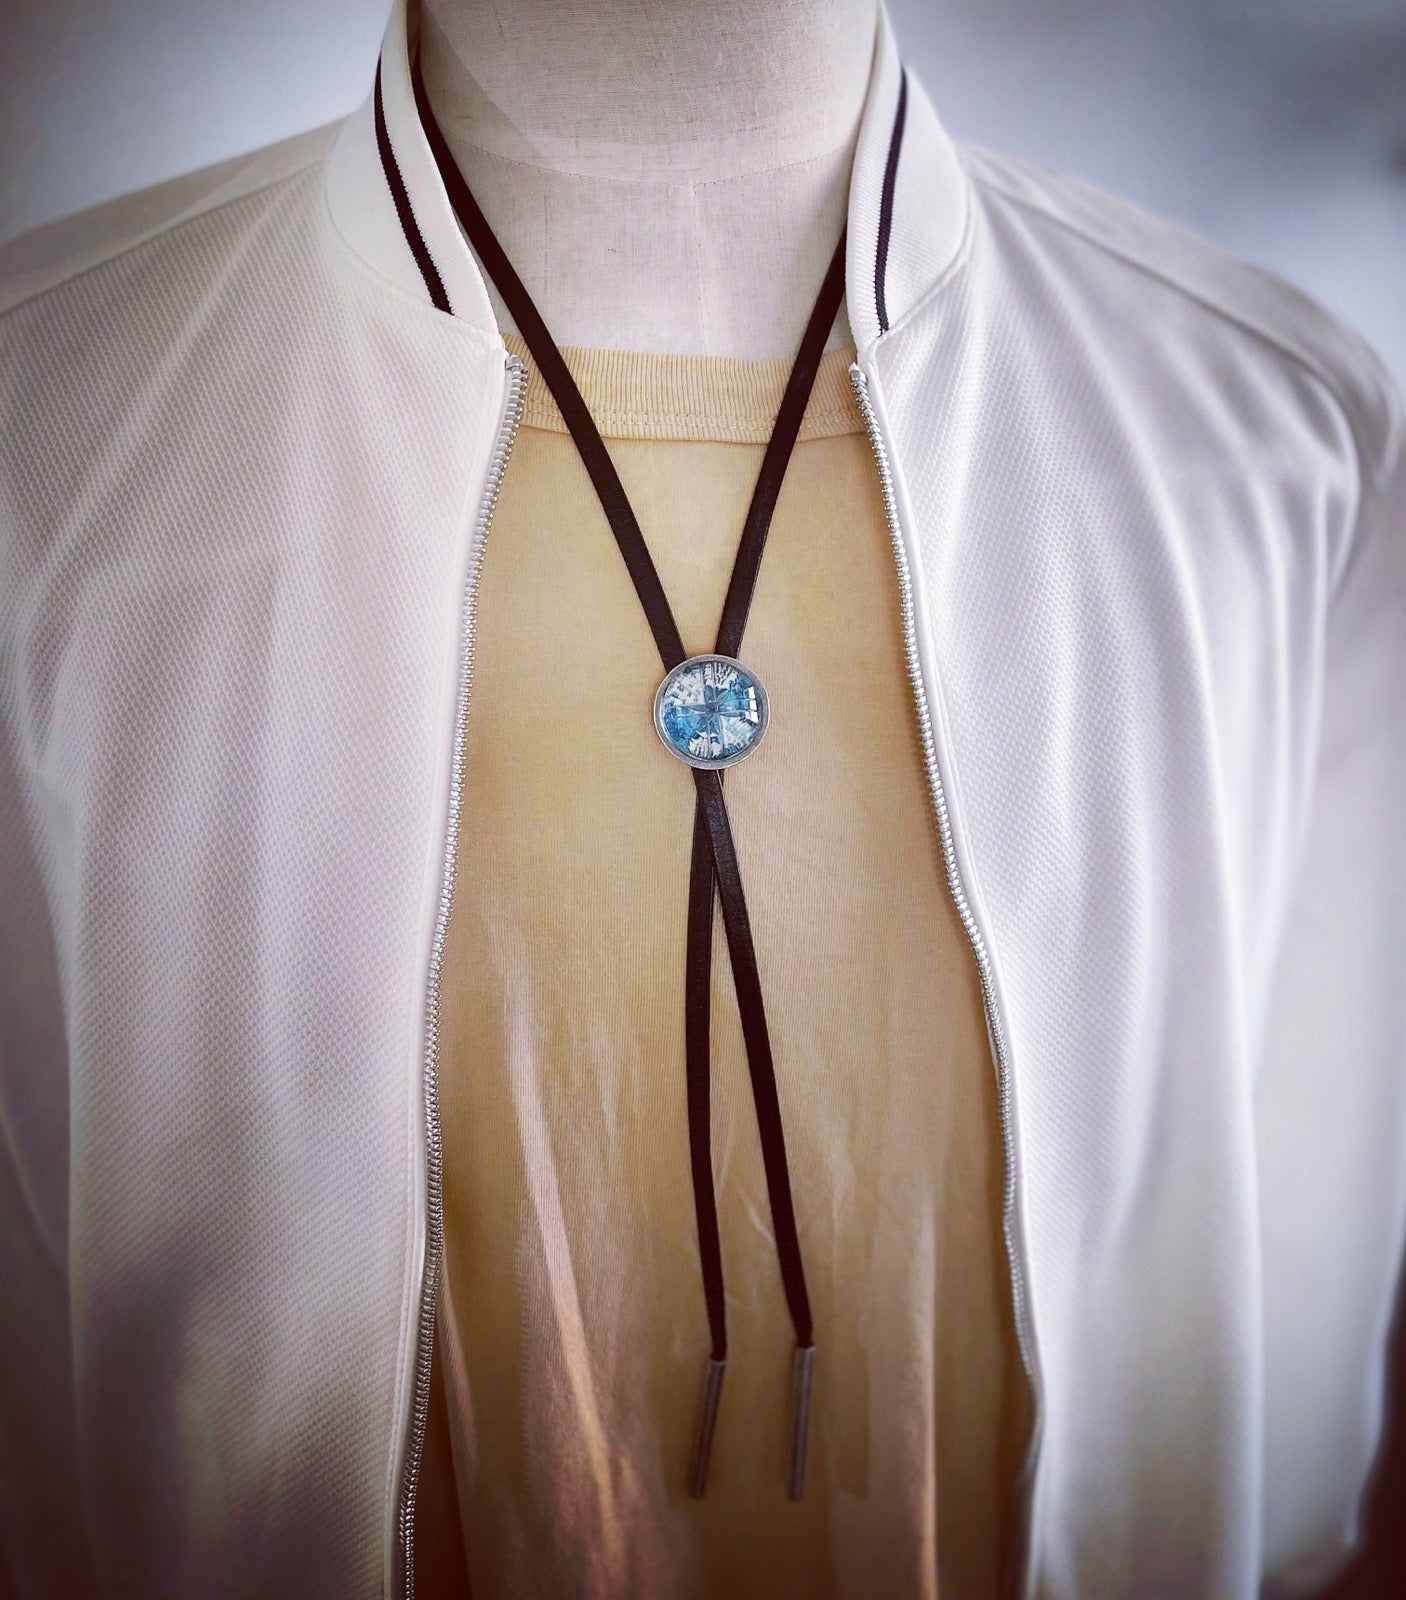 Leather Straps Bolo Tie Lily Blue Handmade TAMARUSAN